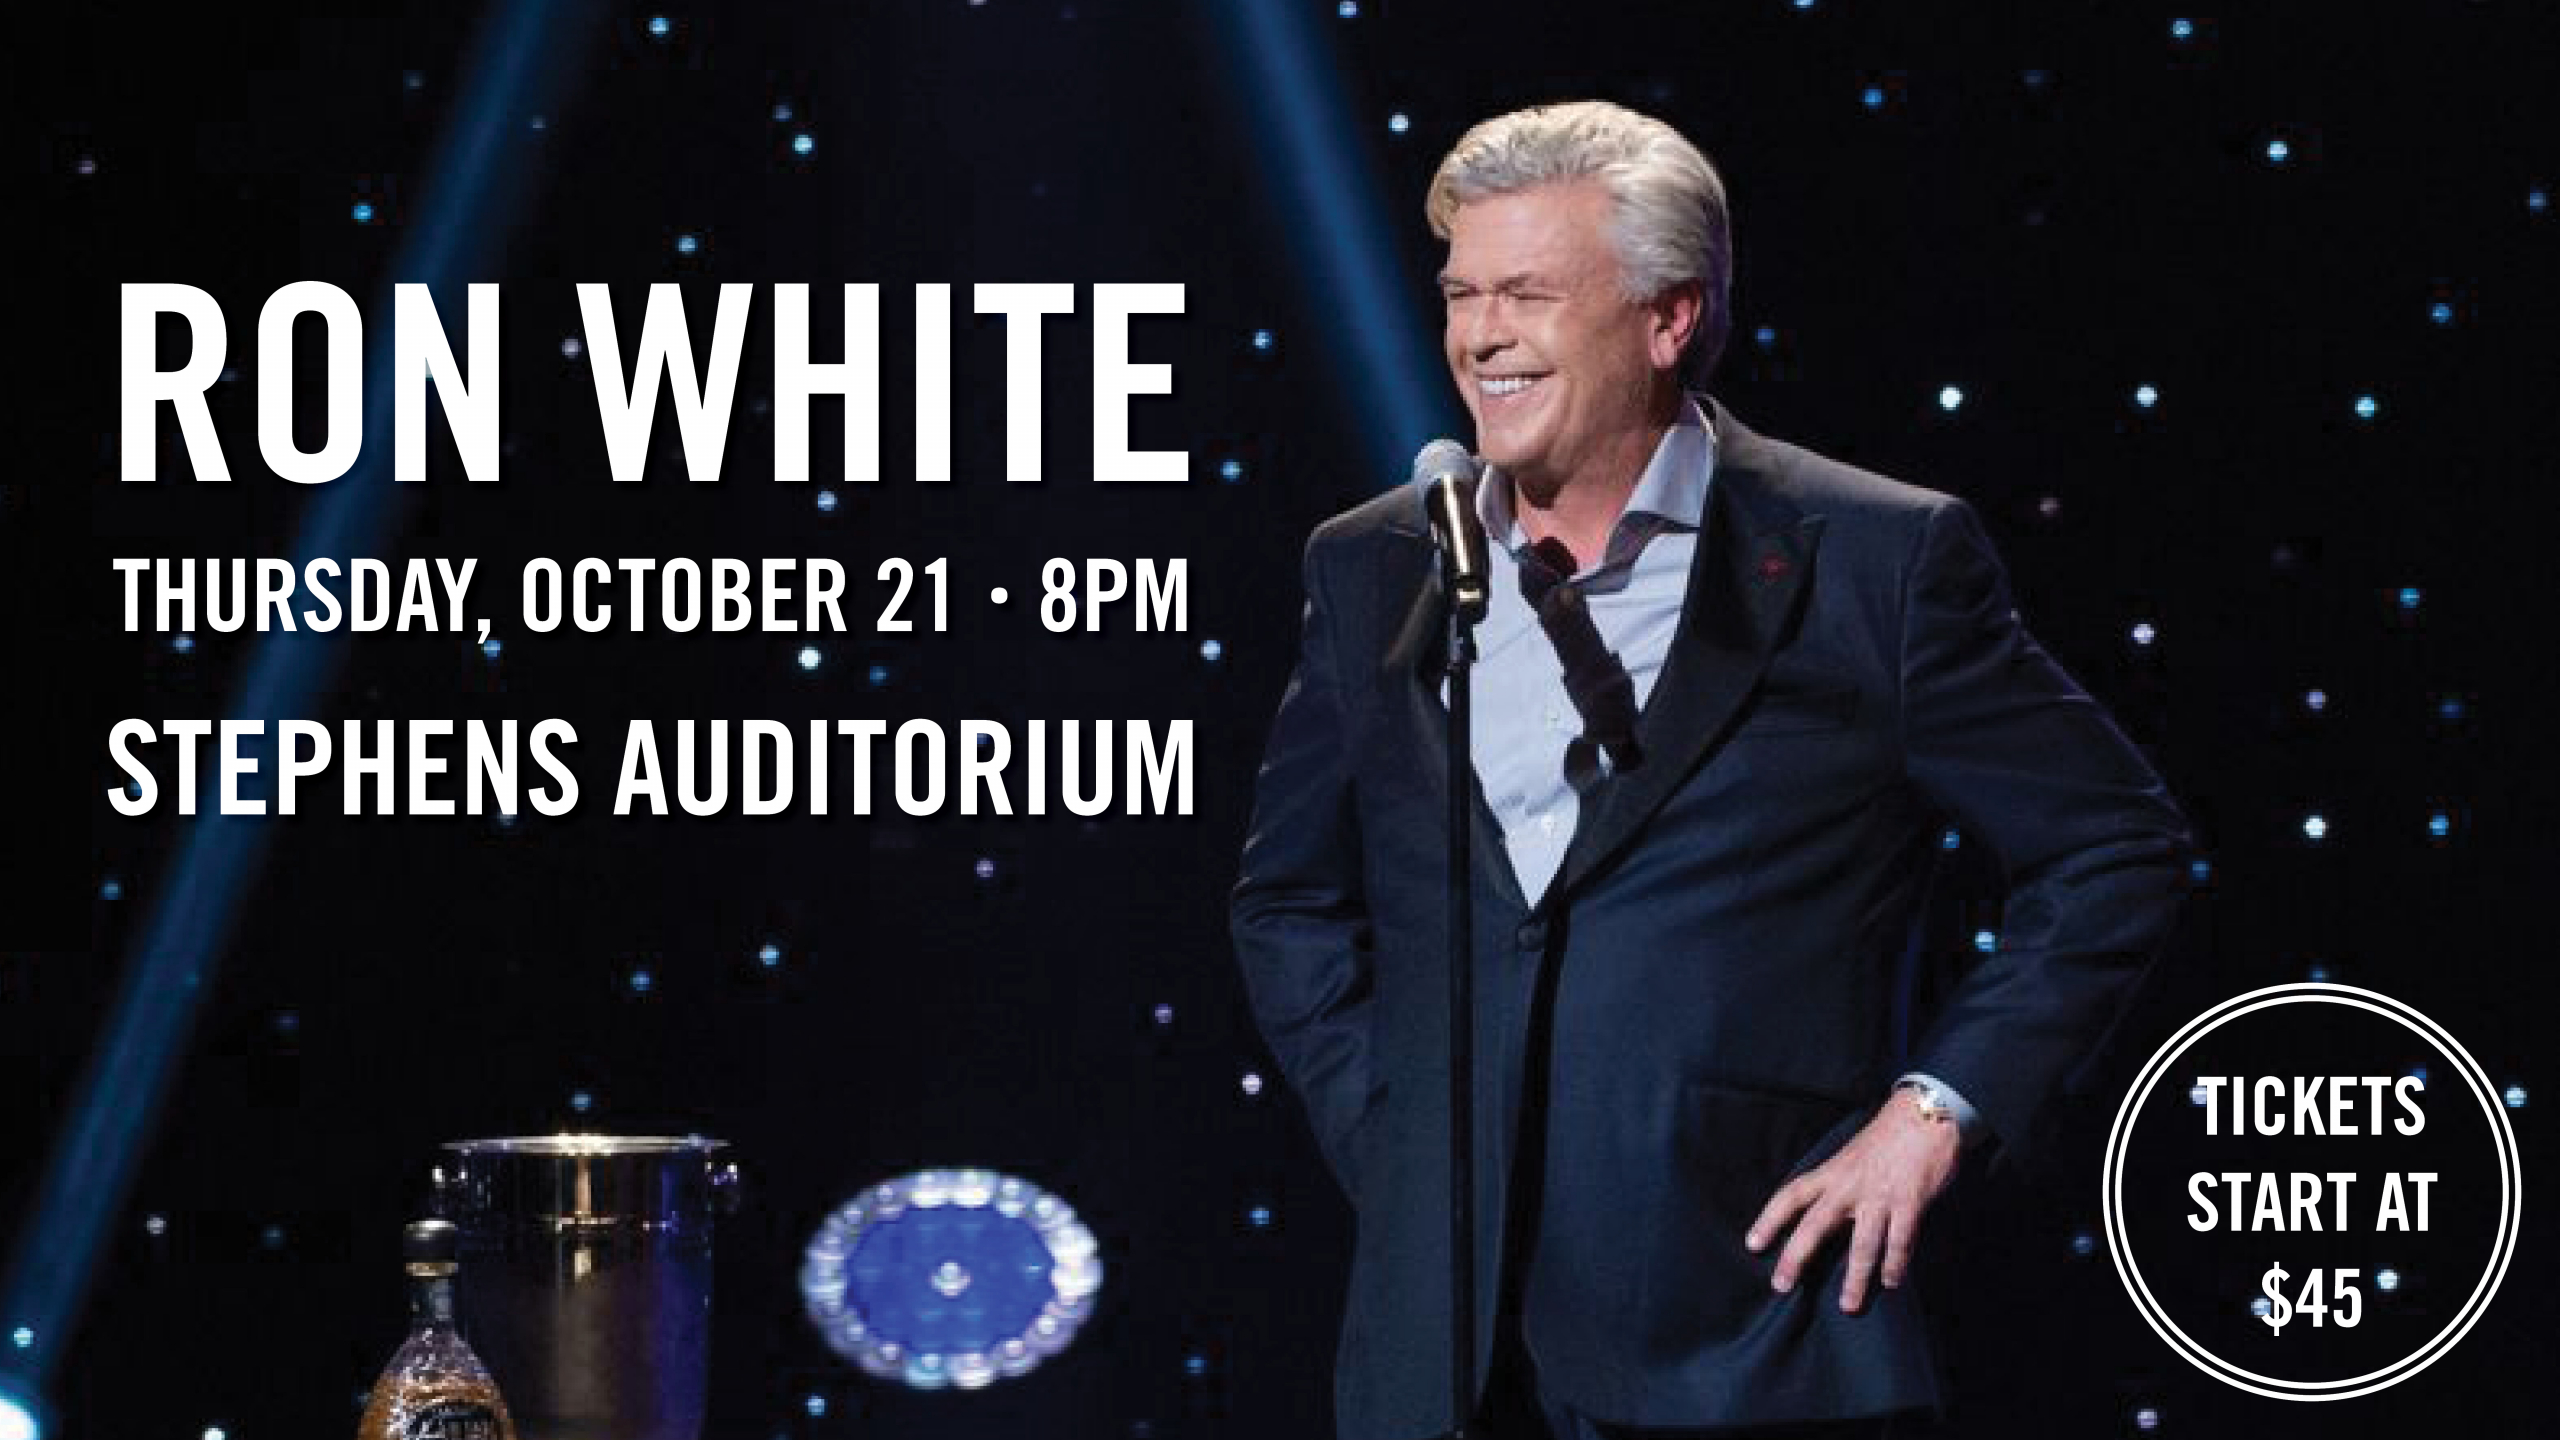 Enter to Win 4 Tickets to see comedian Ron White at Stephens Auditorium!